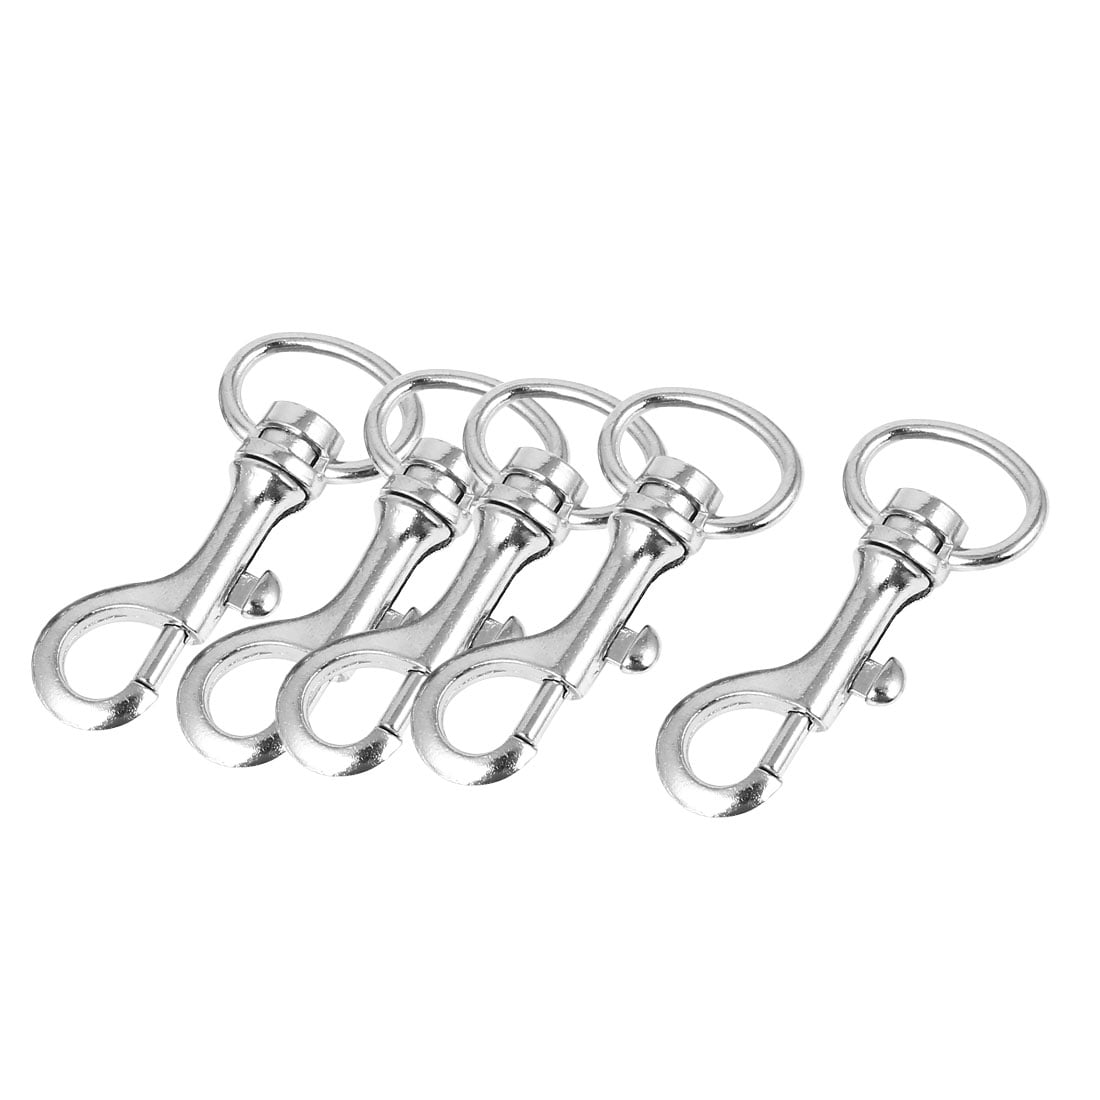 Strap Spring Snaps Lot of 6  Stainless Hooks Clip Fasteners 2" for 1/2" strap 